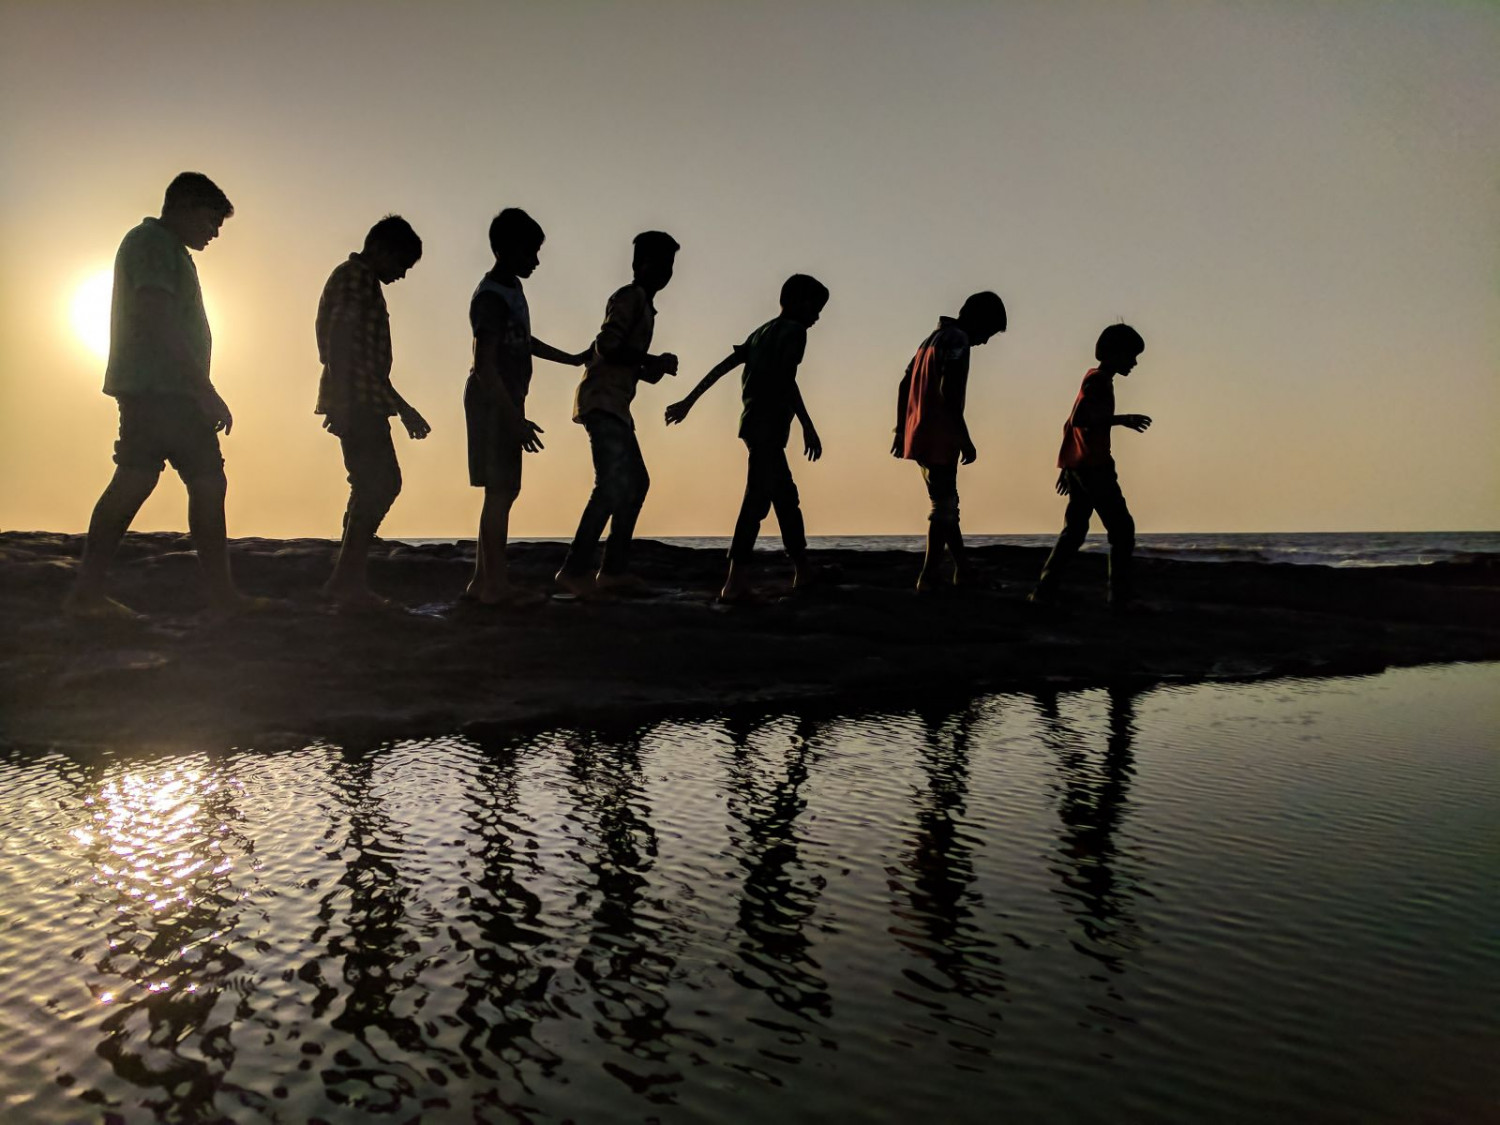 Children approaching the water's edge during sunset